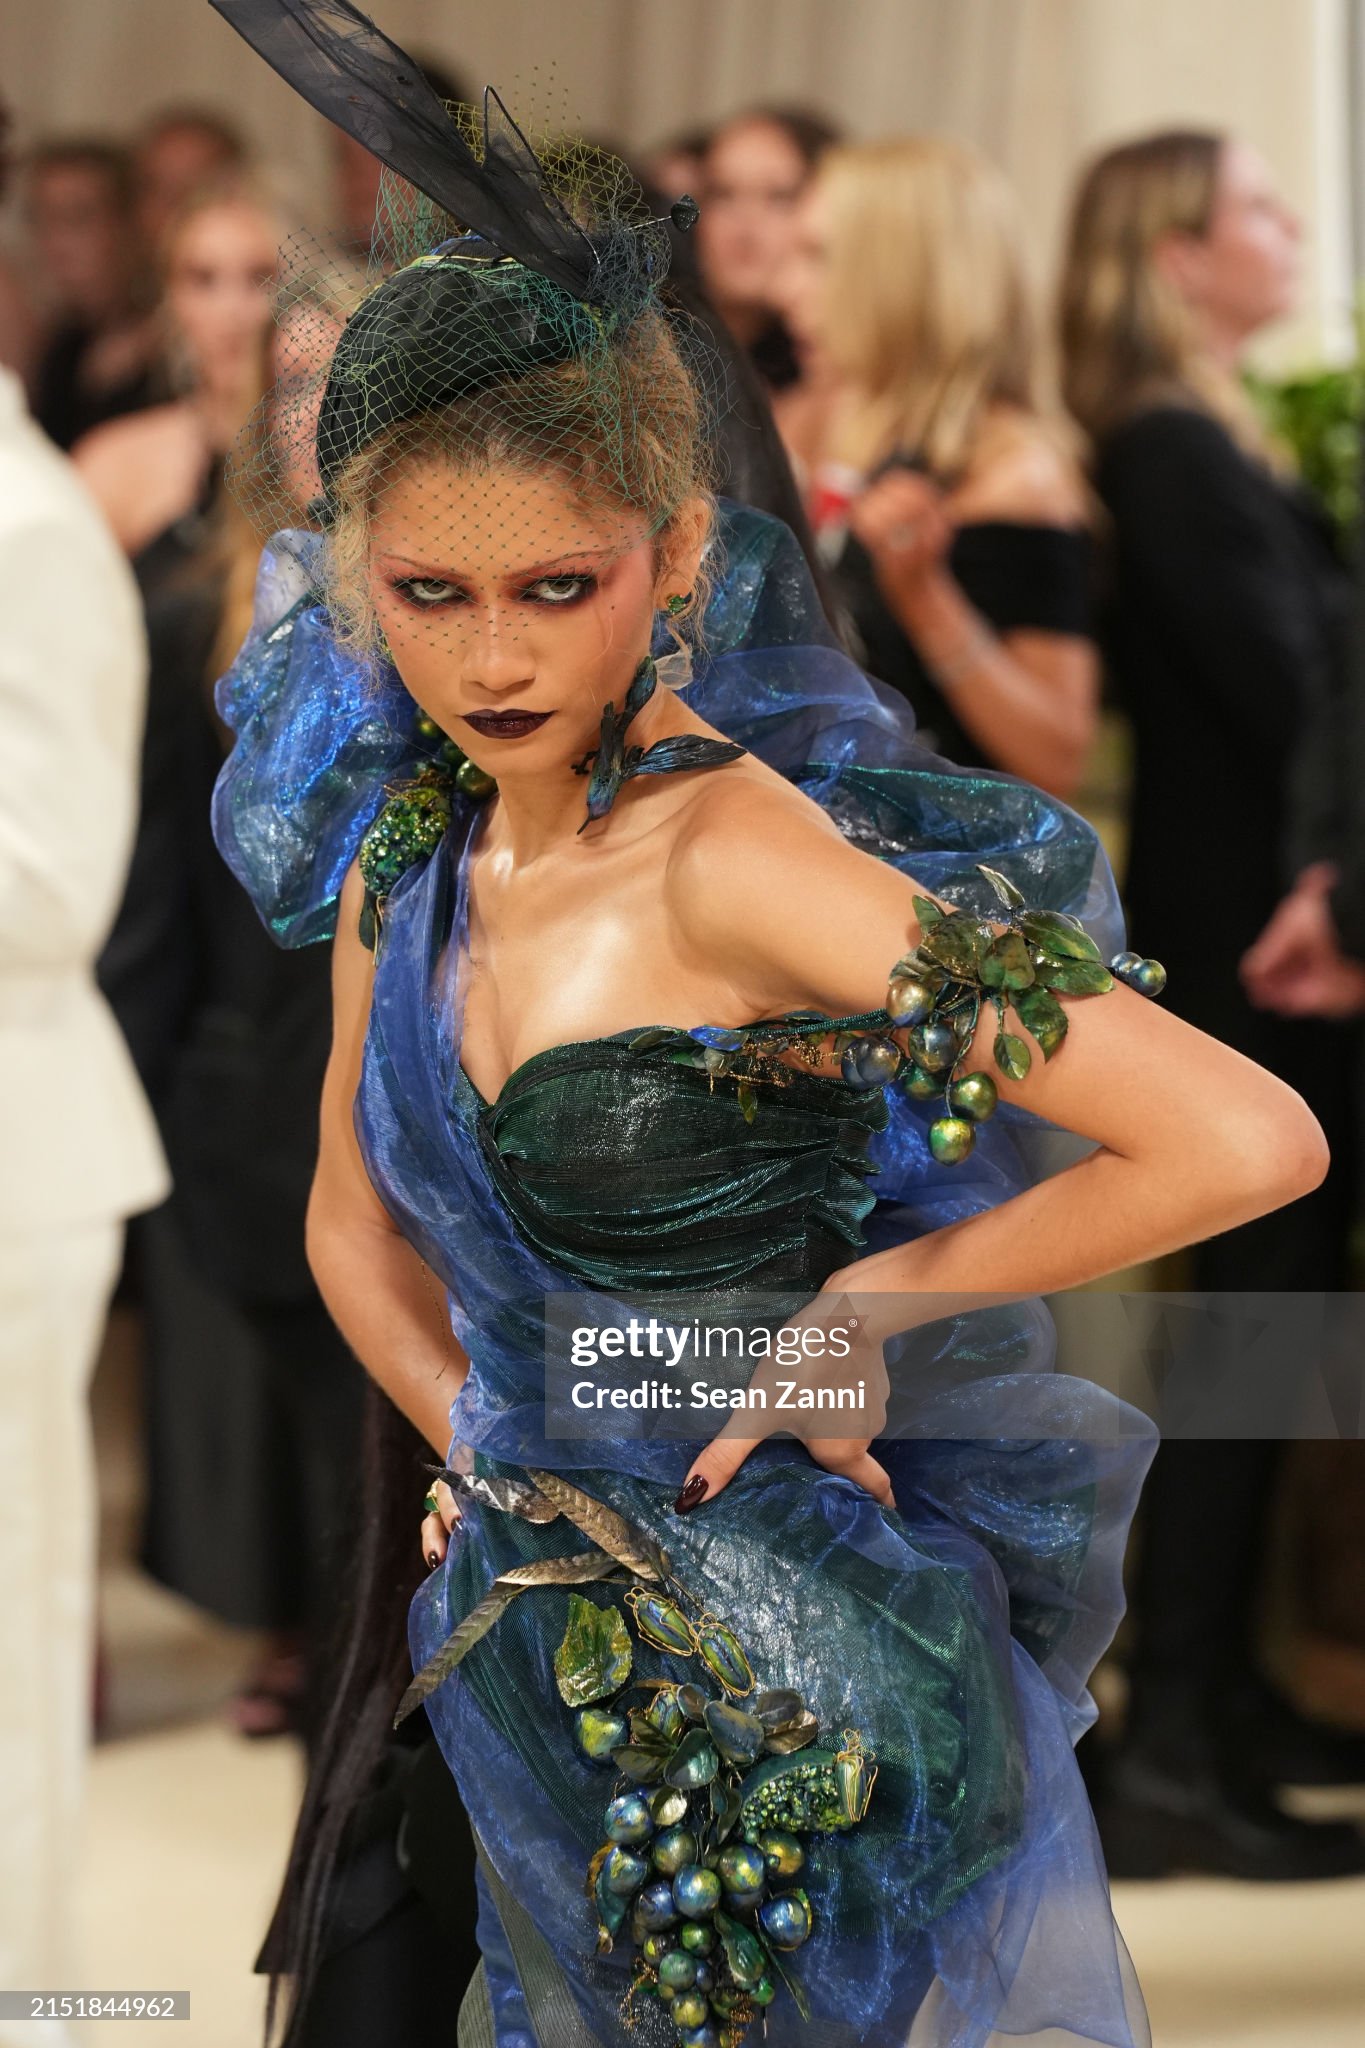 gettyimages-2151844962-2048x2048.jpg